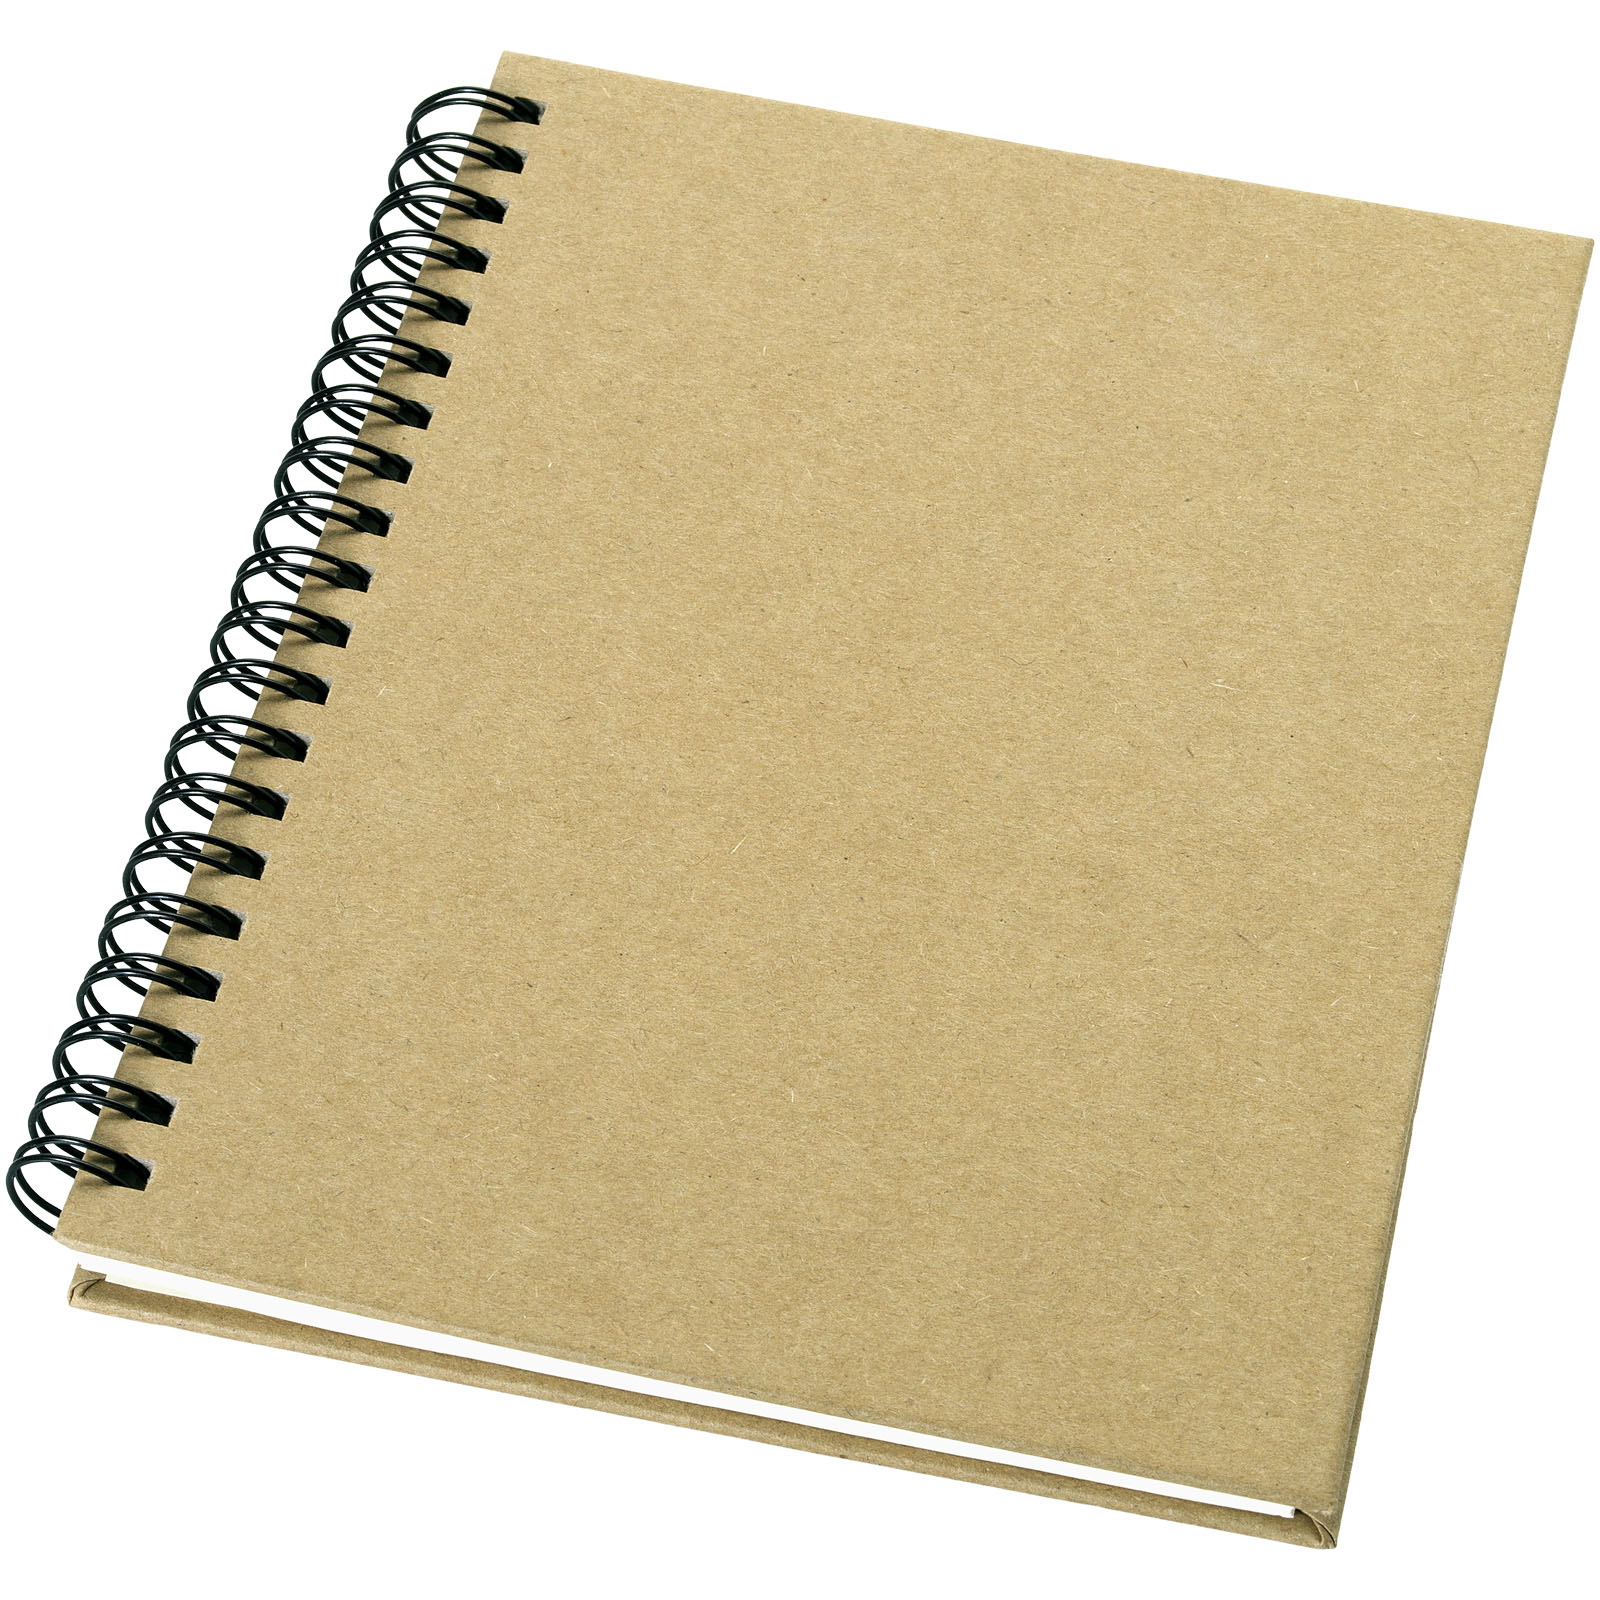 Mendel Recycled Notebook - Oxford - Winchfield